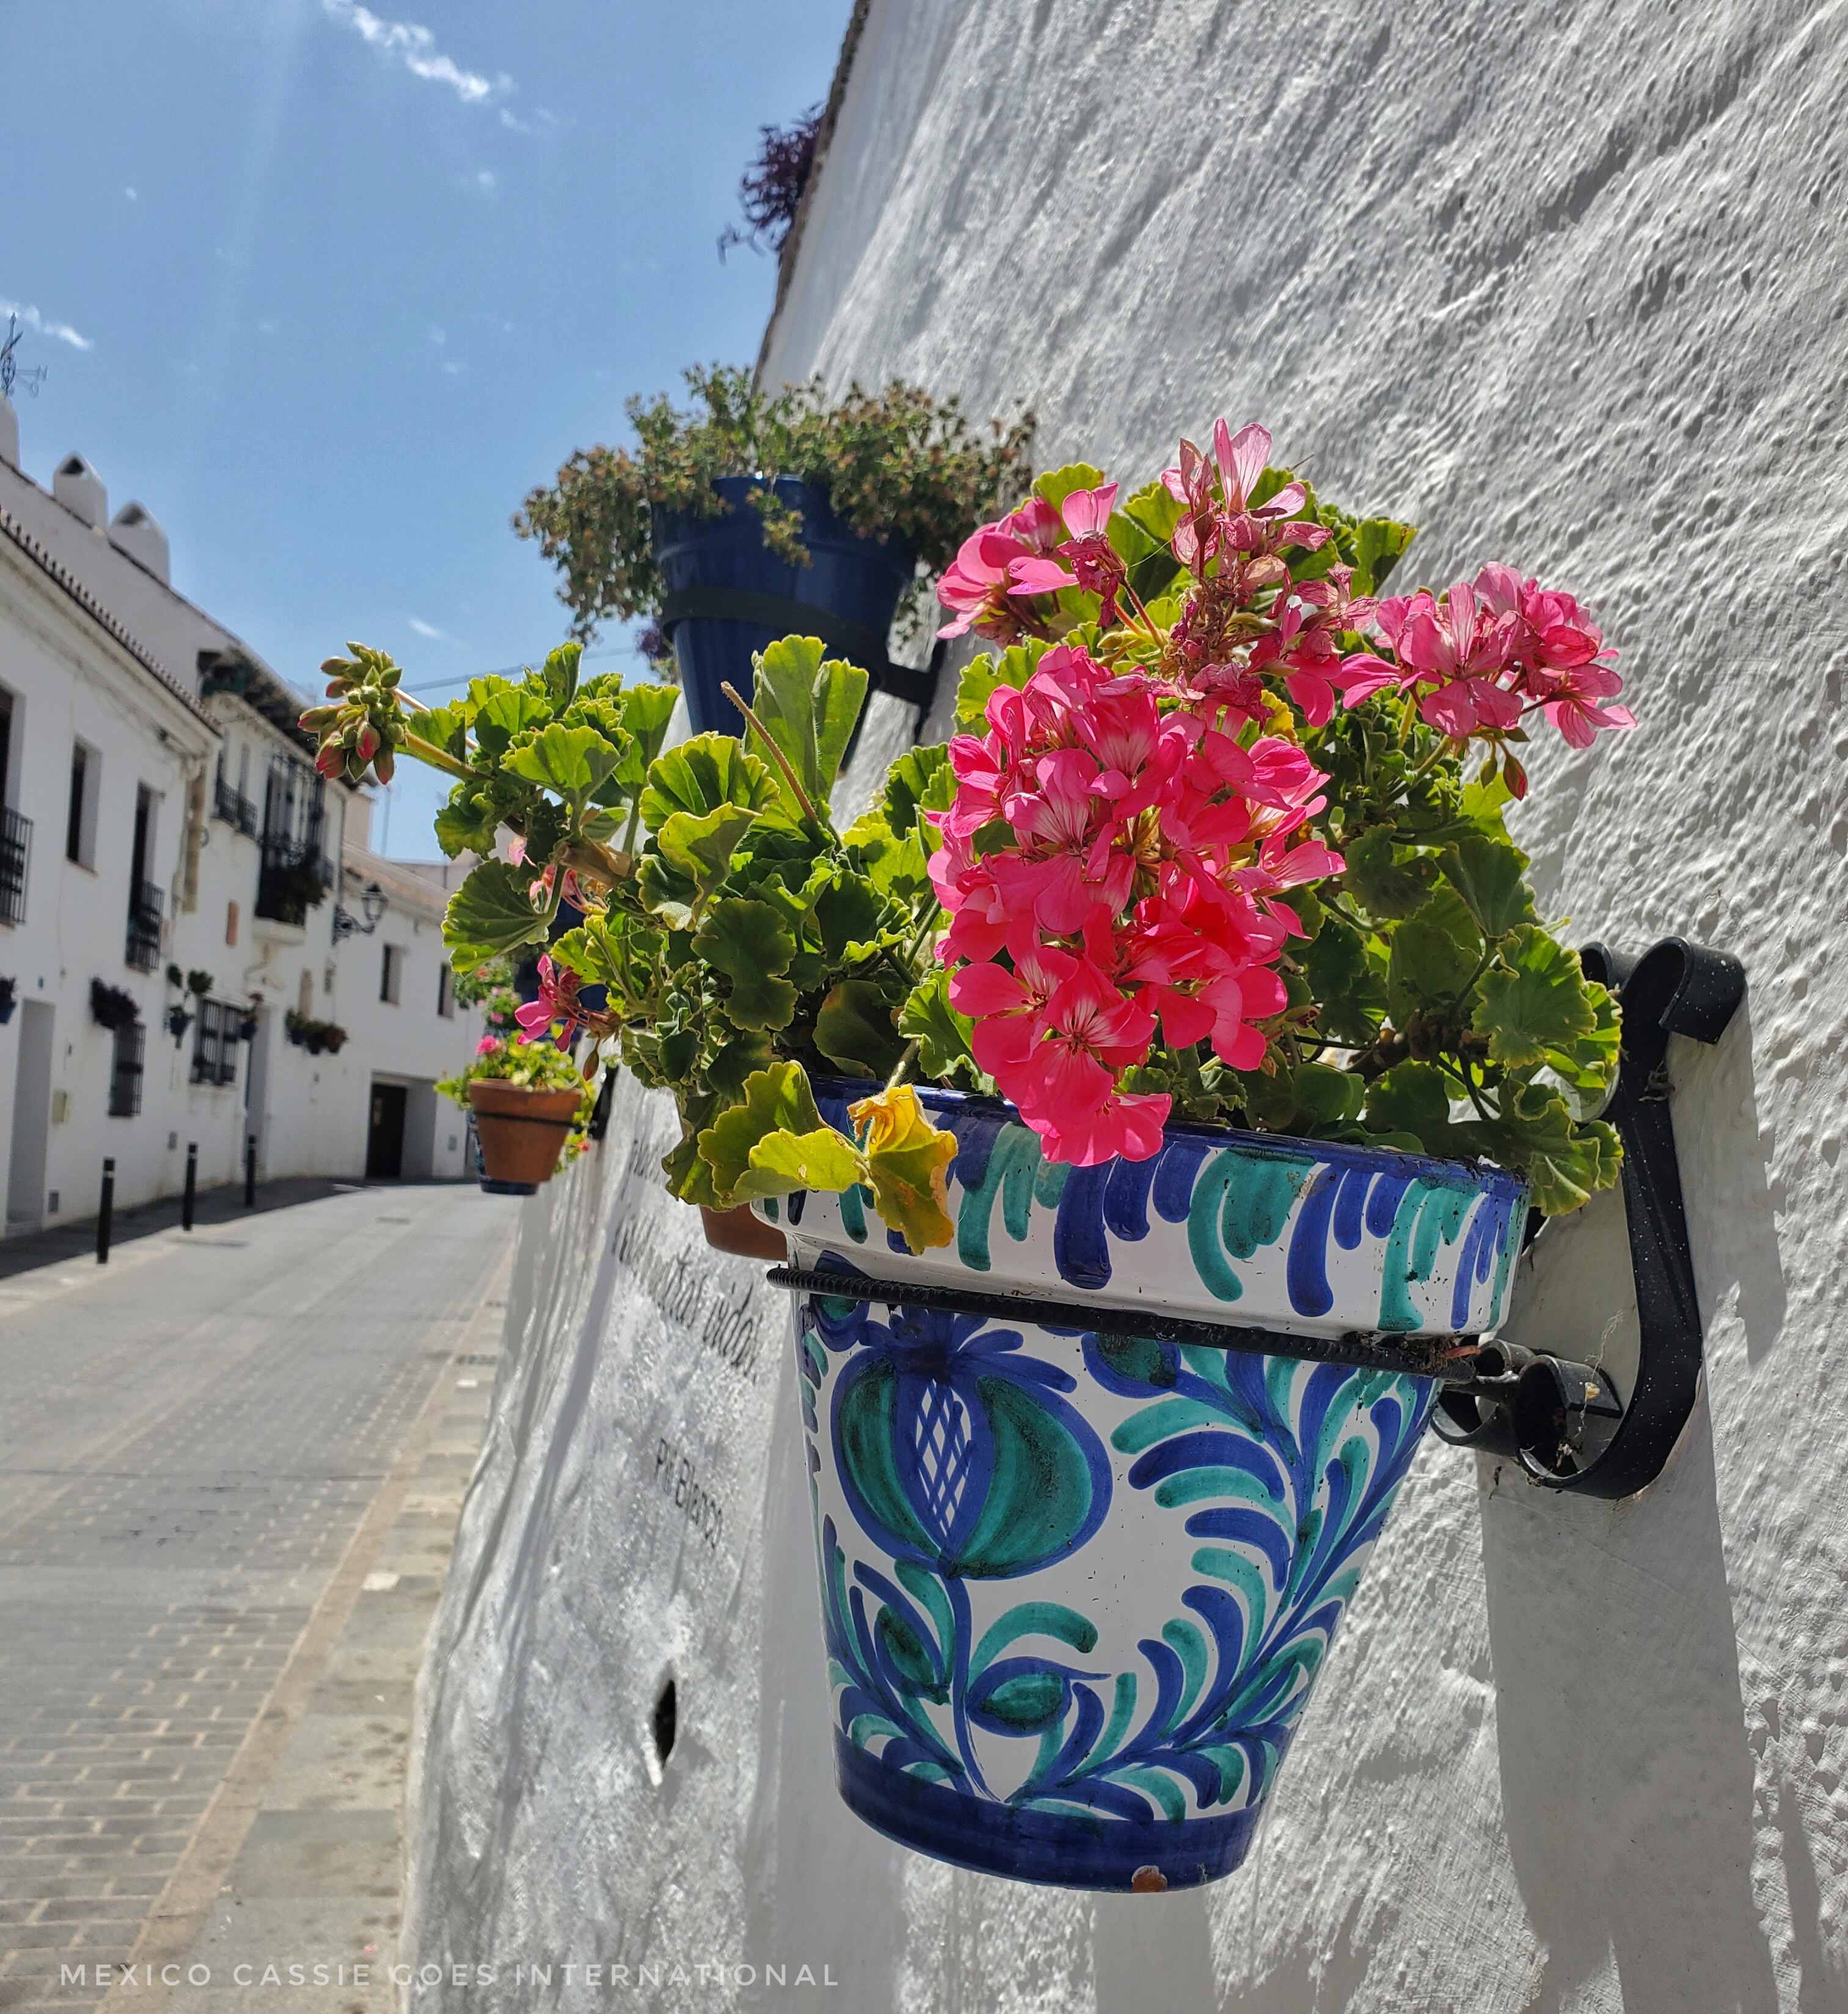 close up of blue and white patterned flower pot held to white wall with iron. pink flowers, houses in background